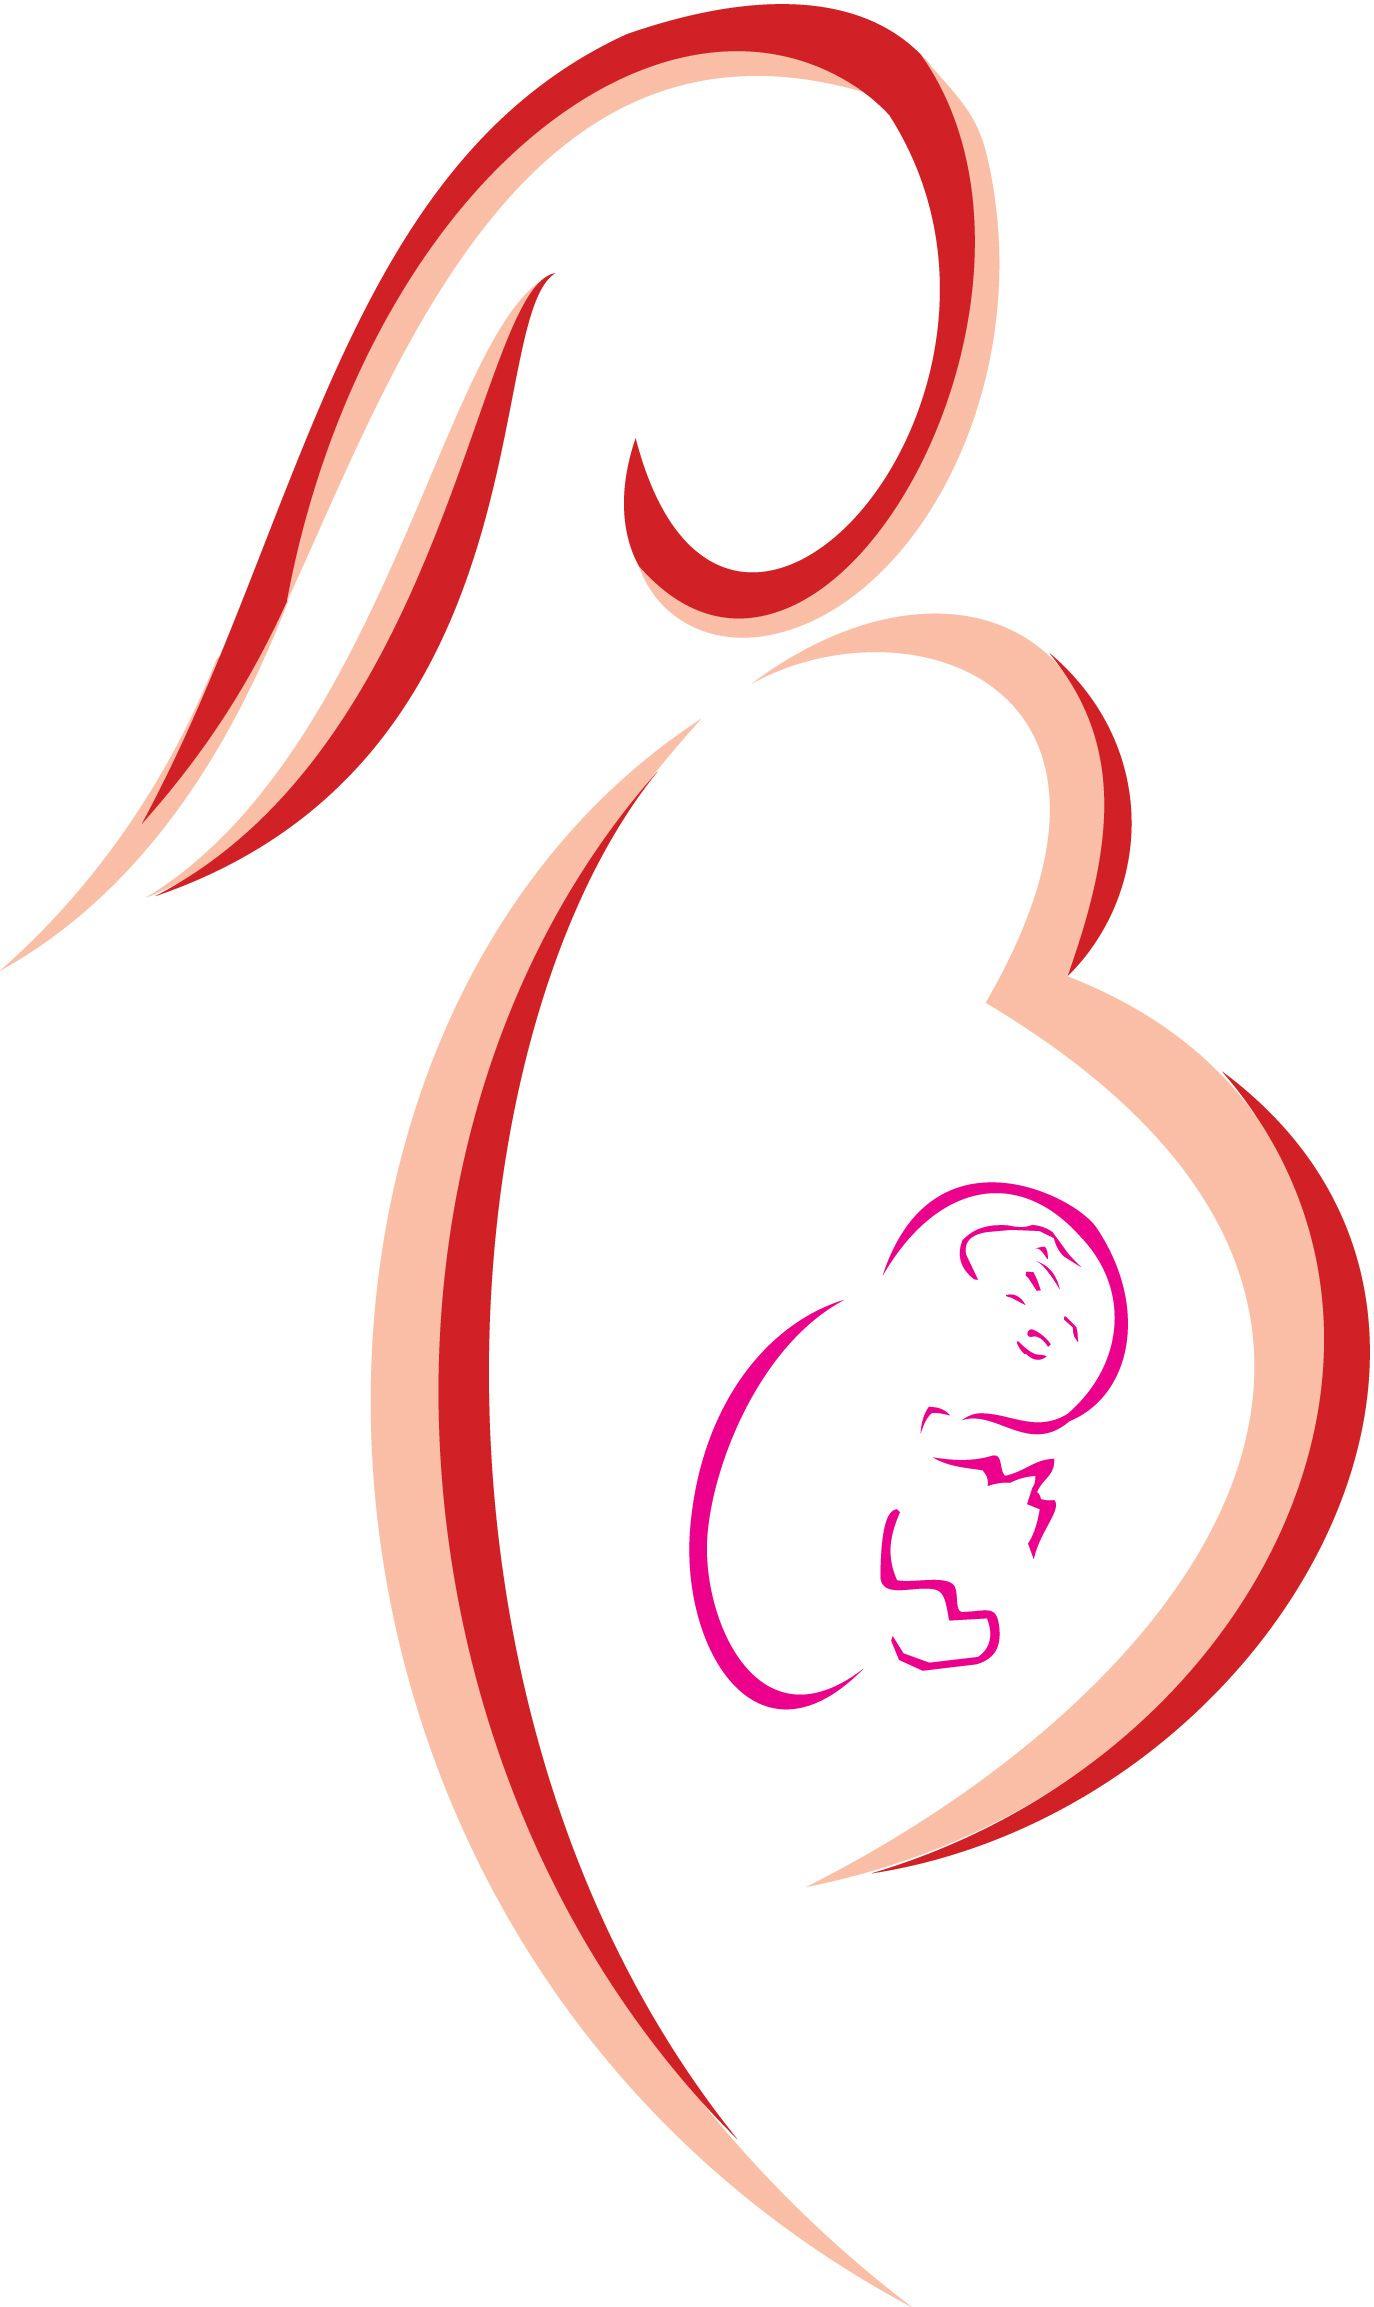 Gynecology Logo - Dr. Neera Seth's Clinic, Gynecology Clinic in Meerut City, Meerut